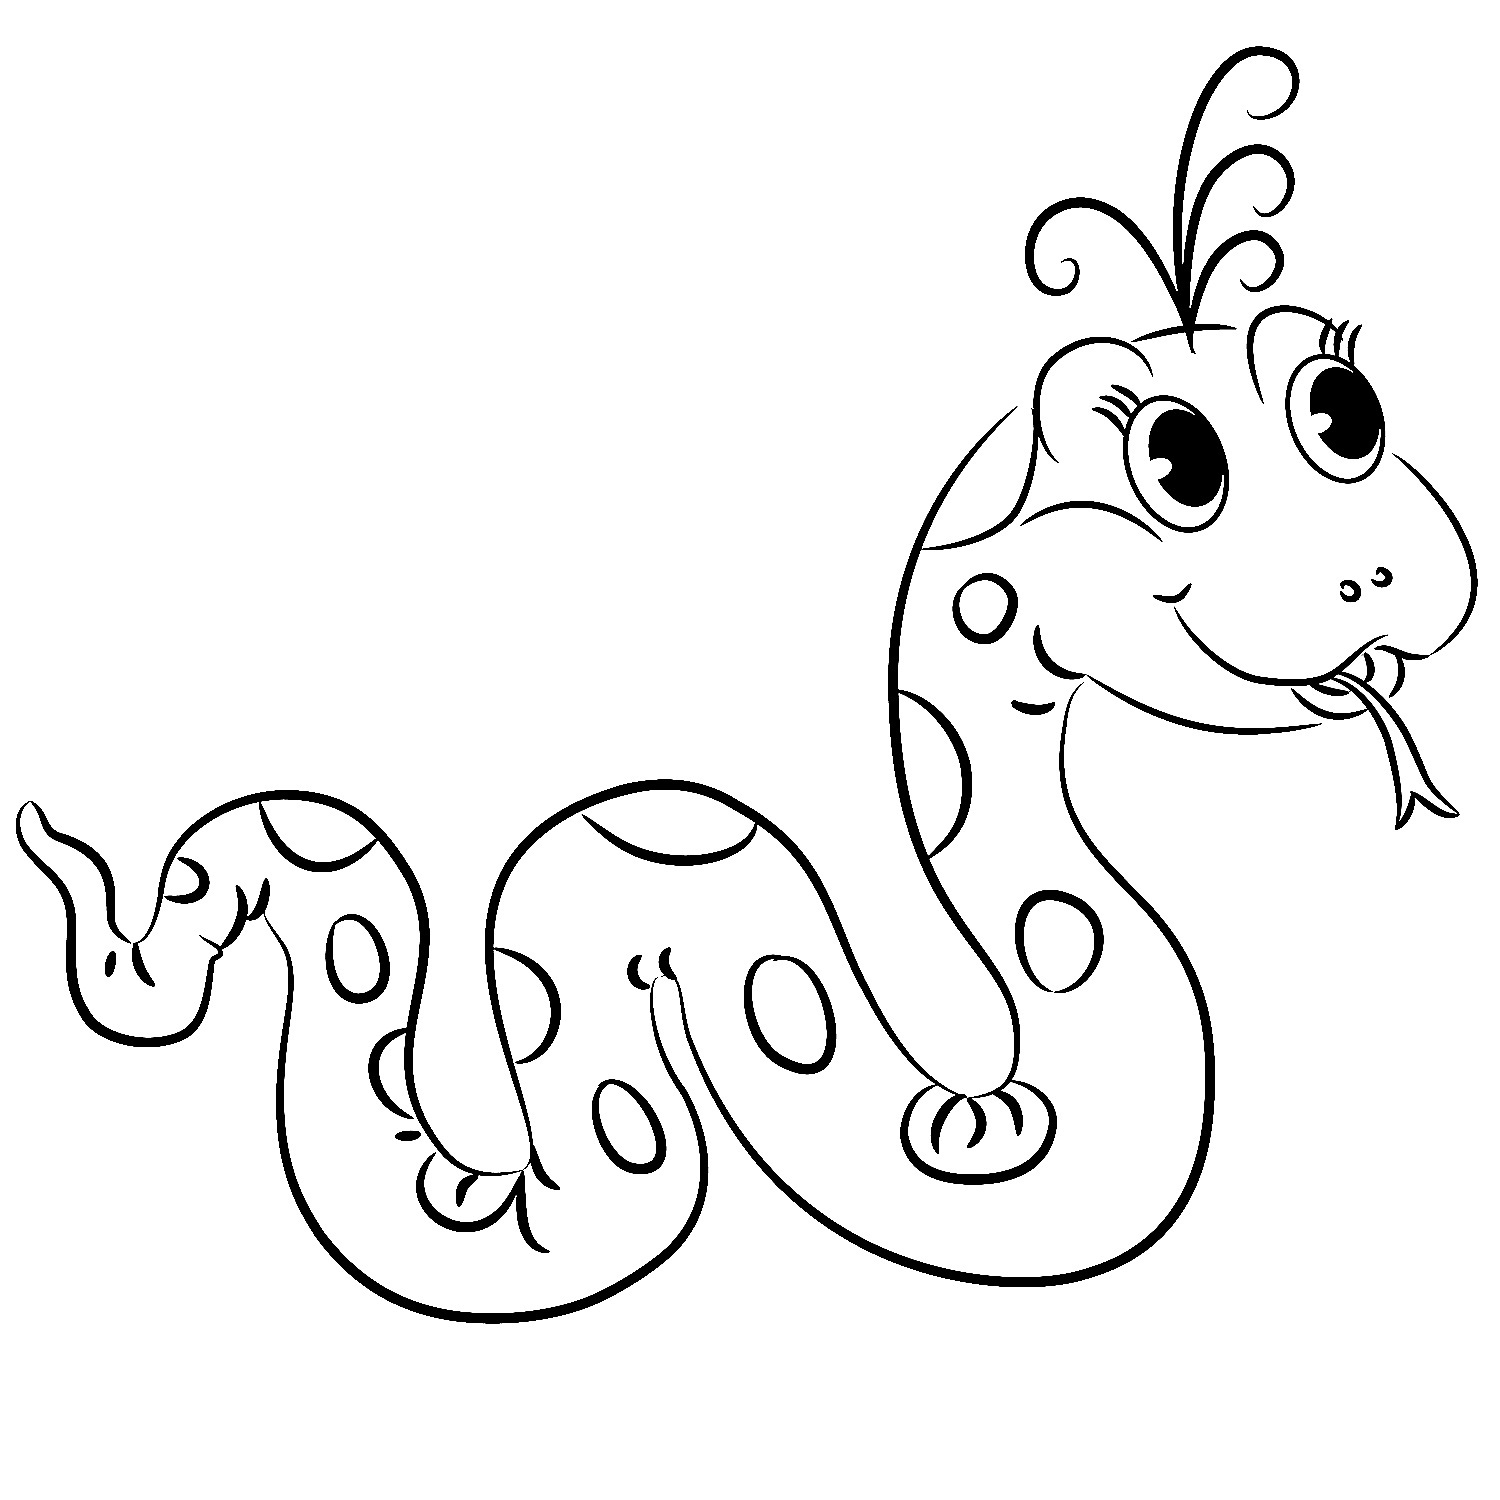 Snake Coloring Pages to Print | ColoringMe.com